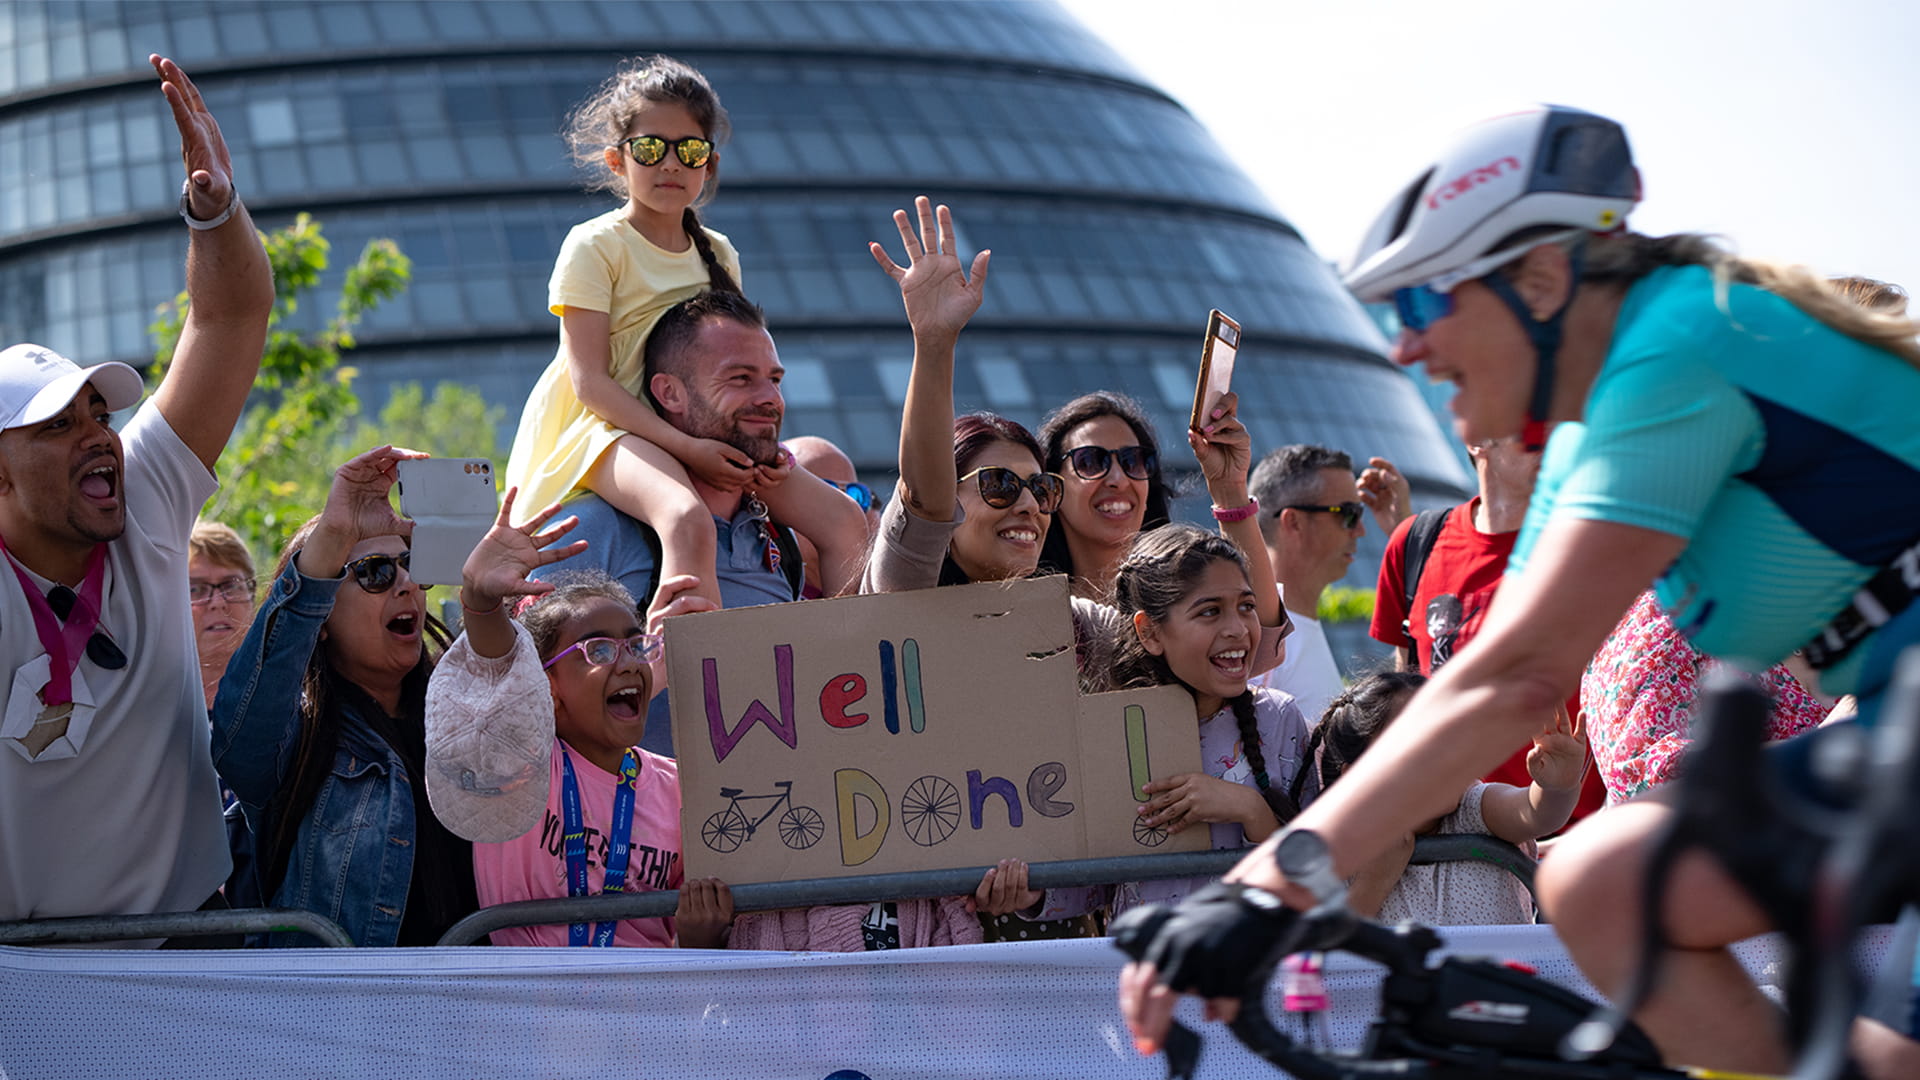 Spectators at the Ford RideLondon 2023 event